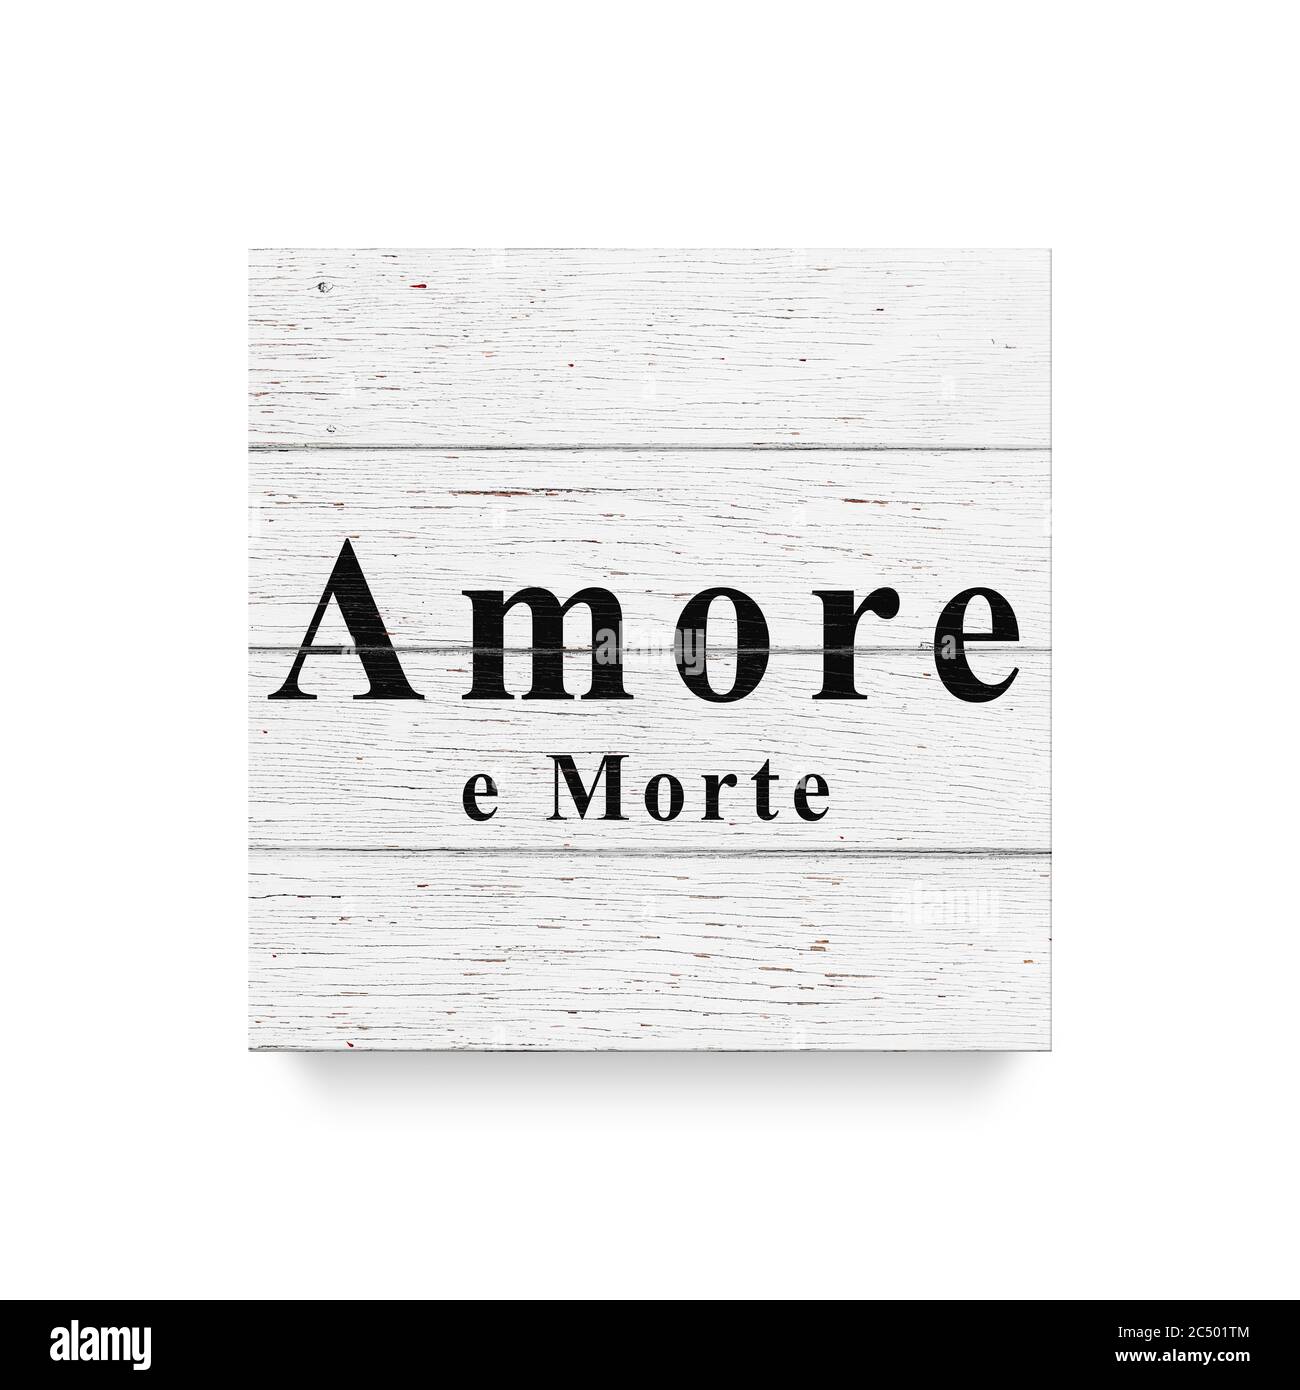 Sign Amore e Morte. love and death. White wooden wall, boards. Old white rustic wood background, wooden surface. Stock Photo